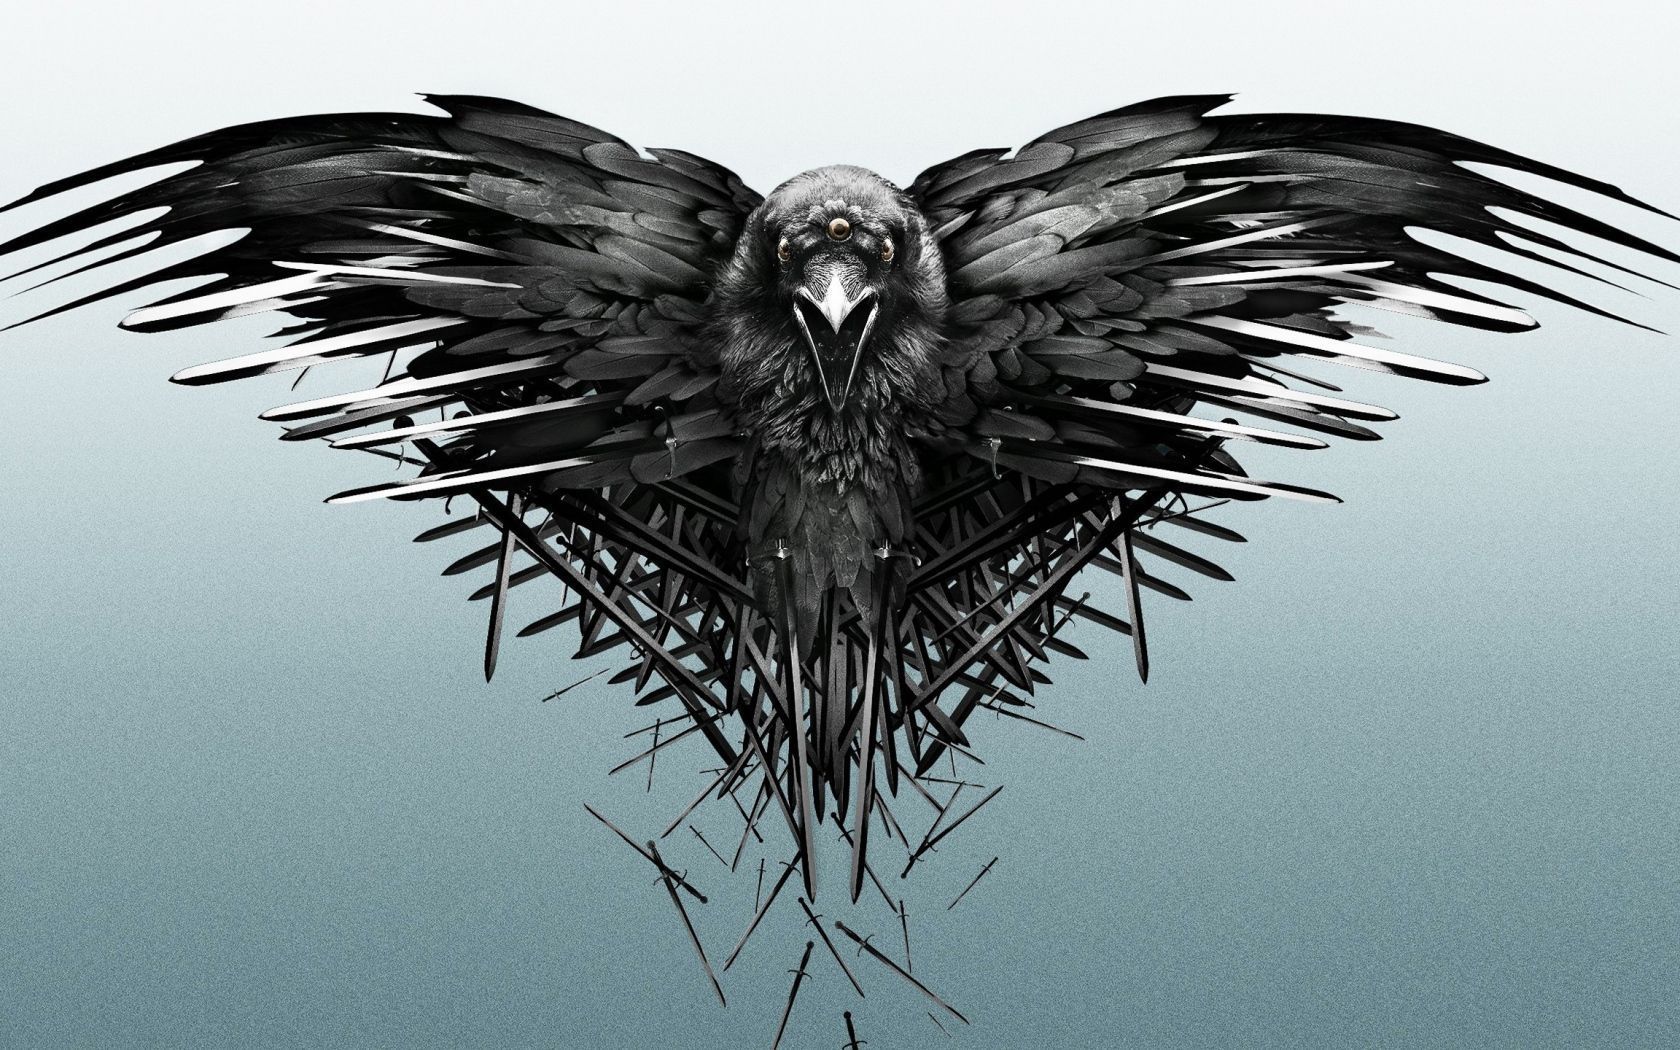 Download Wallpaper 1680x1050 Game of thrones, Game, Raven ...